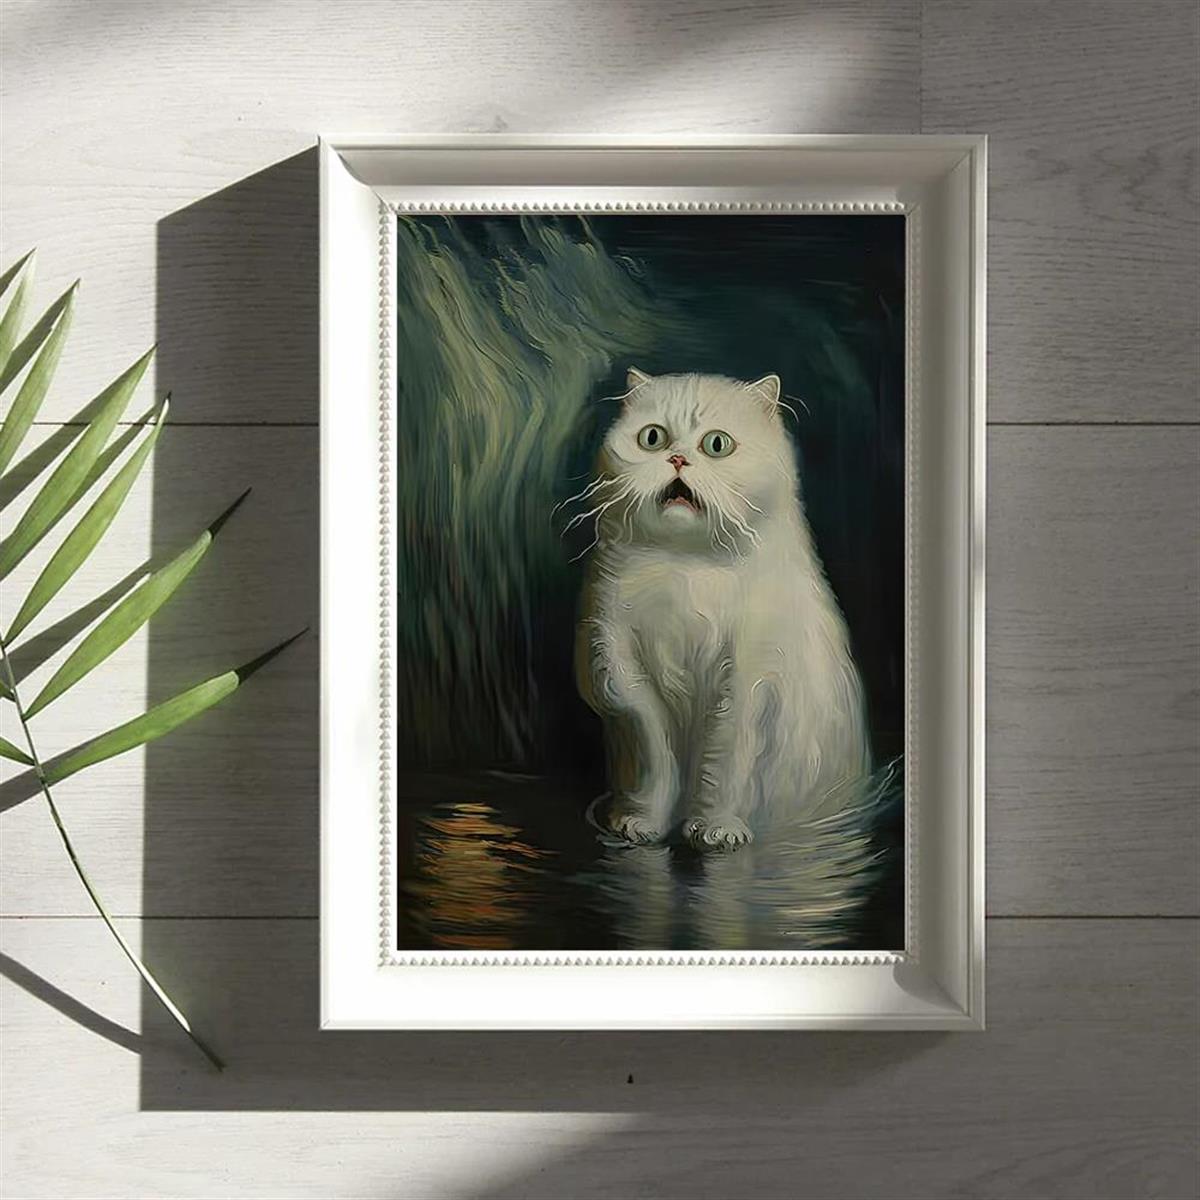 Scared Cat Posters for Sale